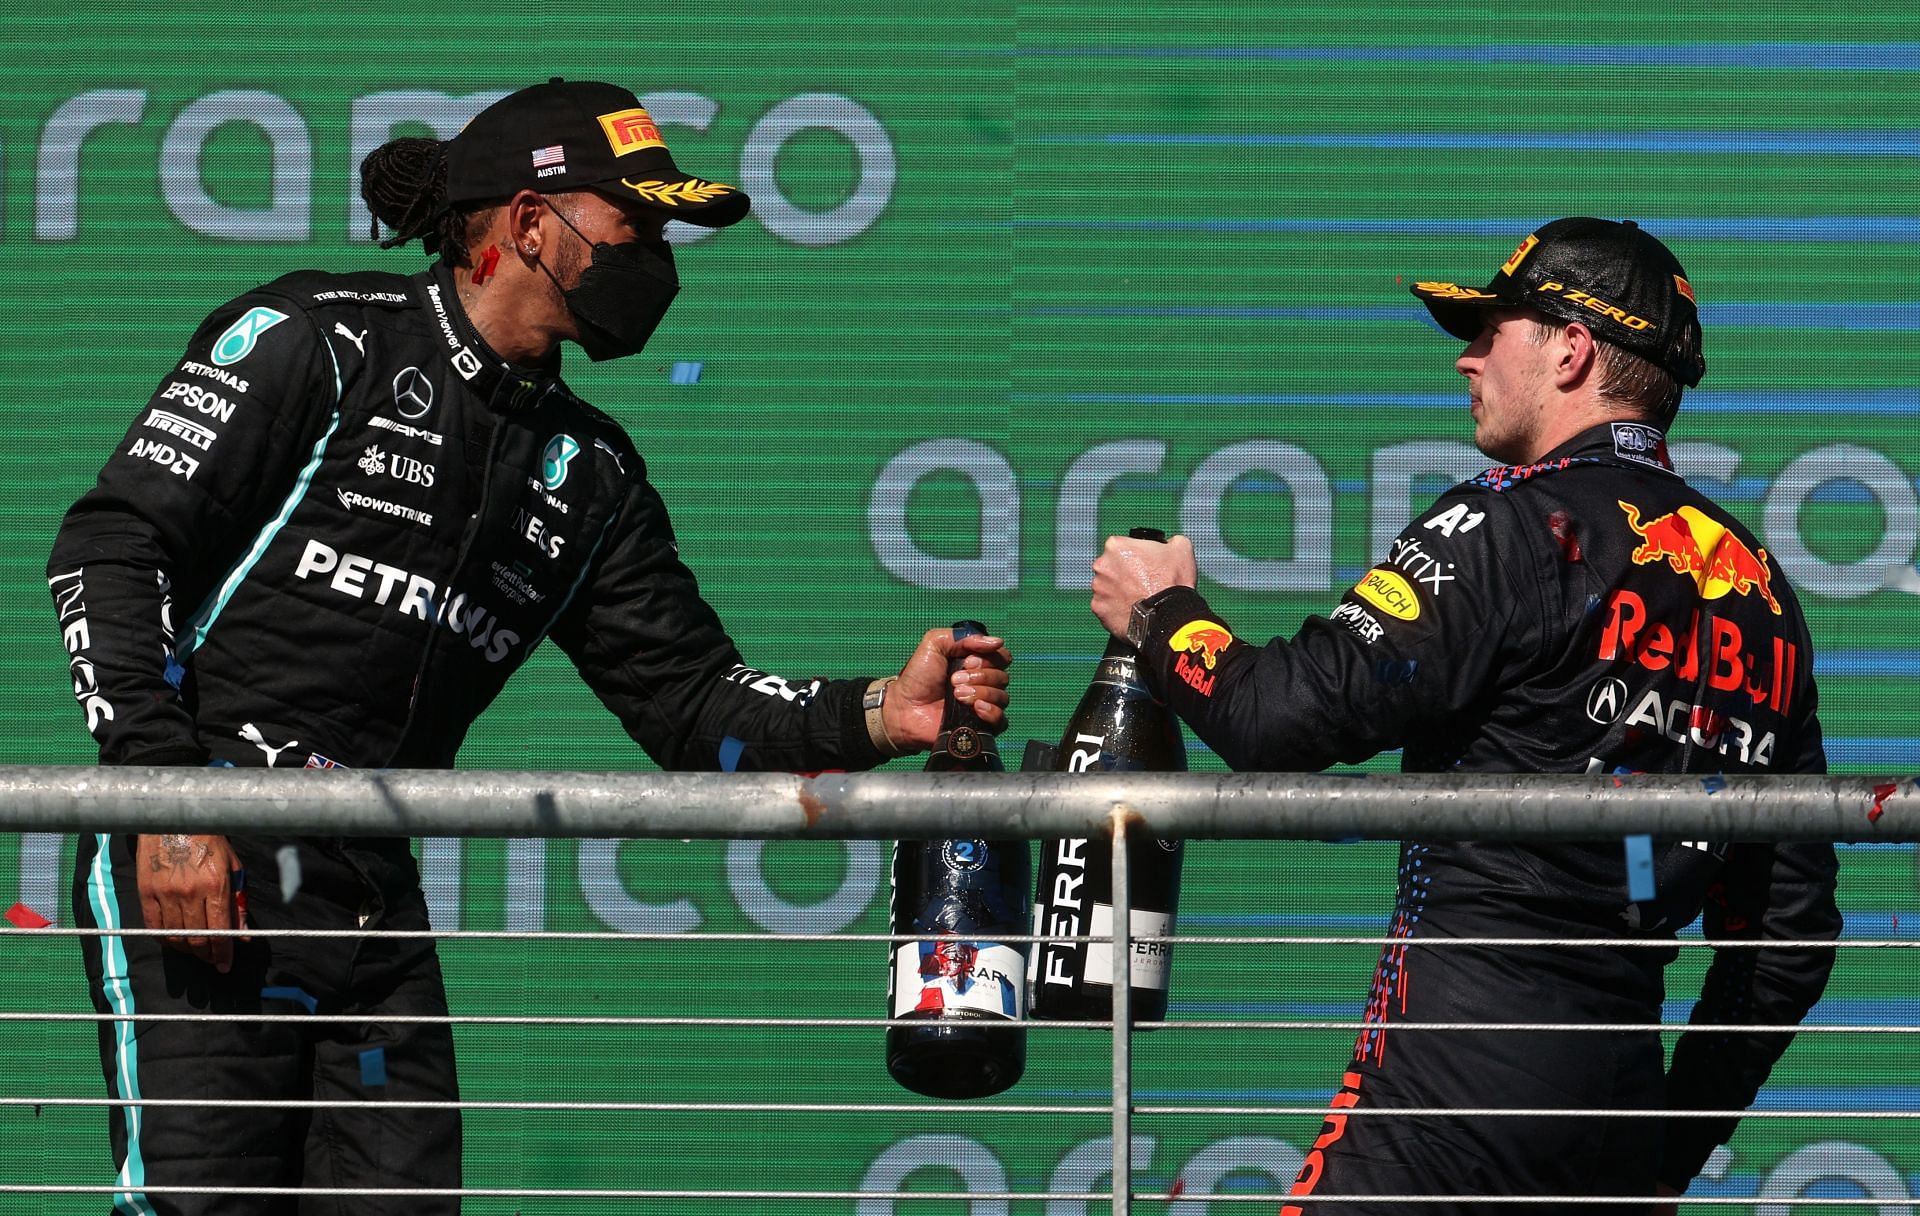 Lewis Hamilton (left) and Max Verstappen (right) on the podium at the 2021 United States Grand Prix (Photo by Chris Graythen/Getty Images)